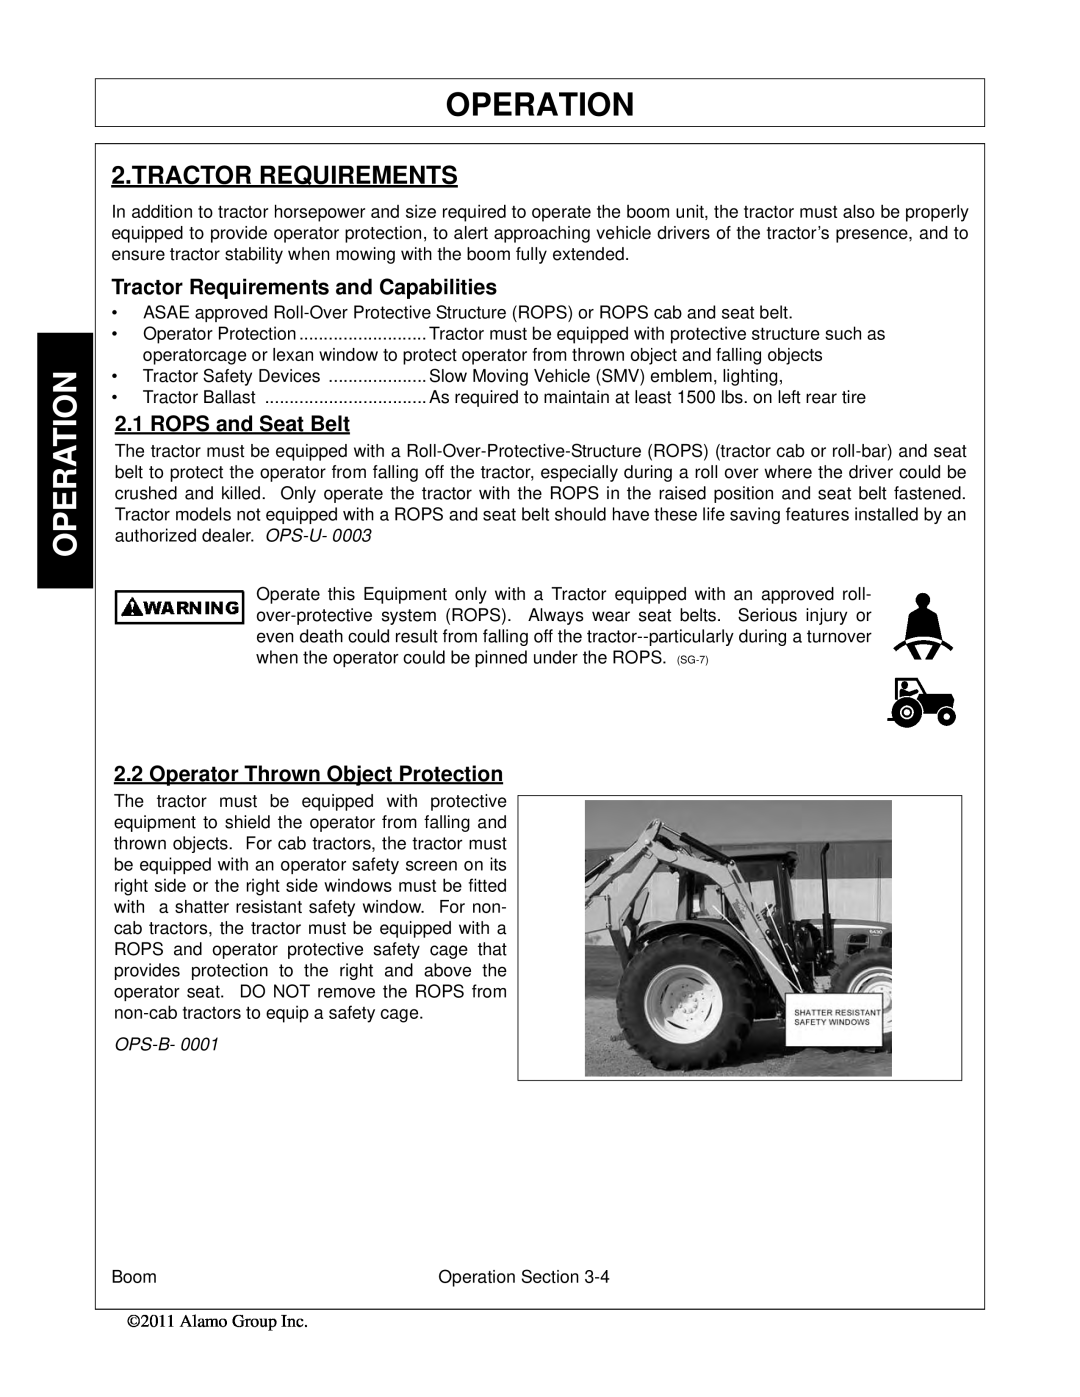 Tiger Products Co., Ltd 5101E Operation, Tractor Requirements and Capabilities, 2.1ROPS and Seat Belt, OPS-B-0001 